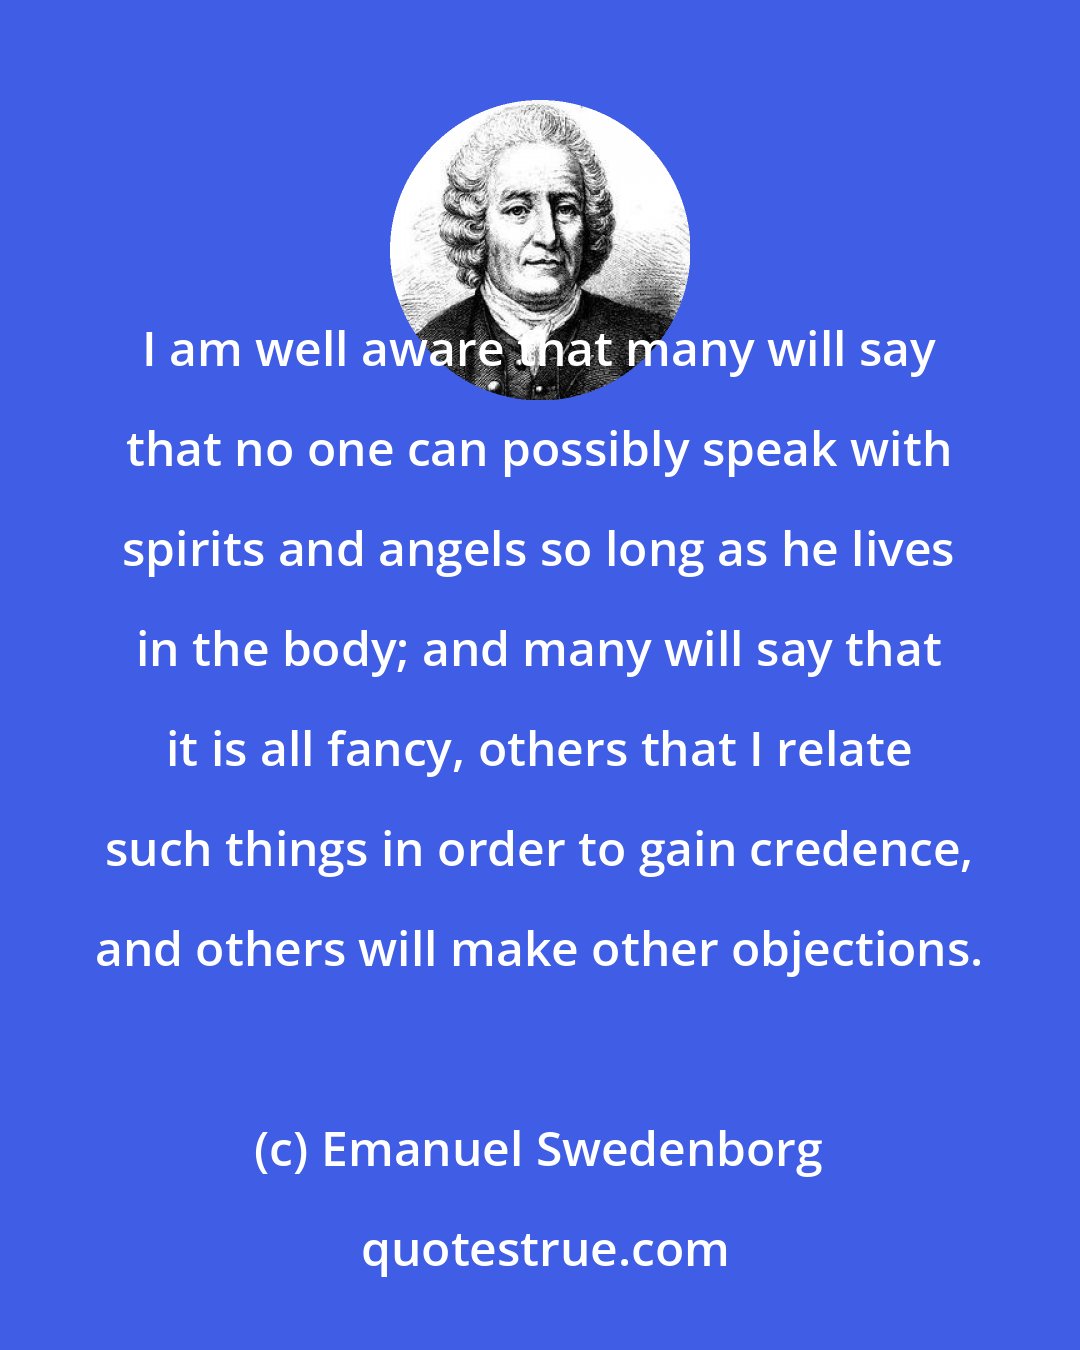 Emanuel Swedenborg: I am well aware that many will say that no one can possibly speak with spirits and angels so long as he lives in the body; and many will say that it is all fancy, others that I relate such things in order to gain credence, and others will make other objections.